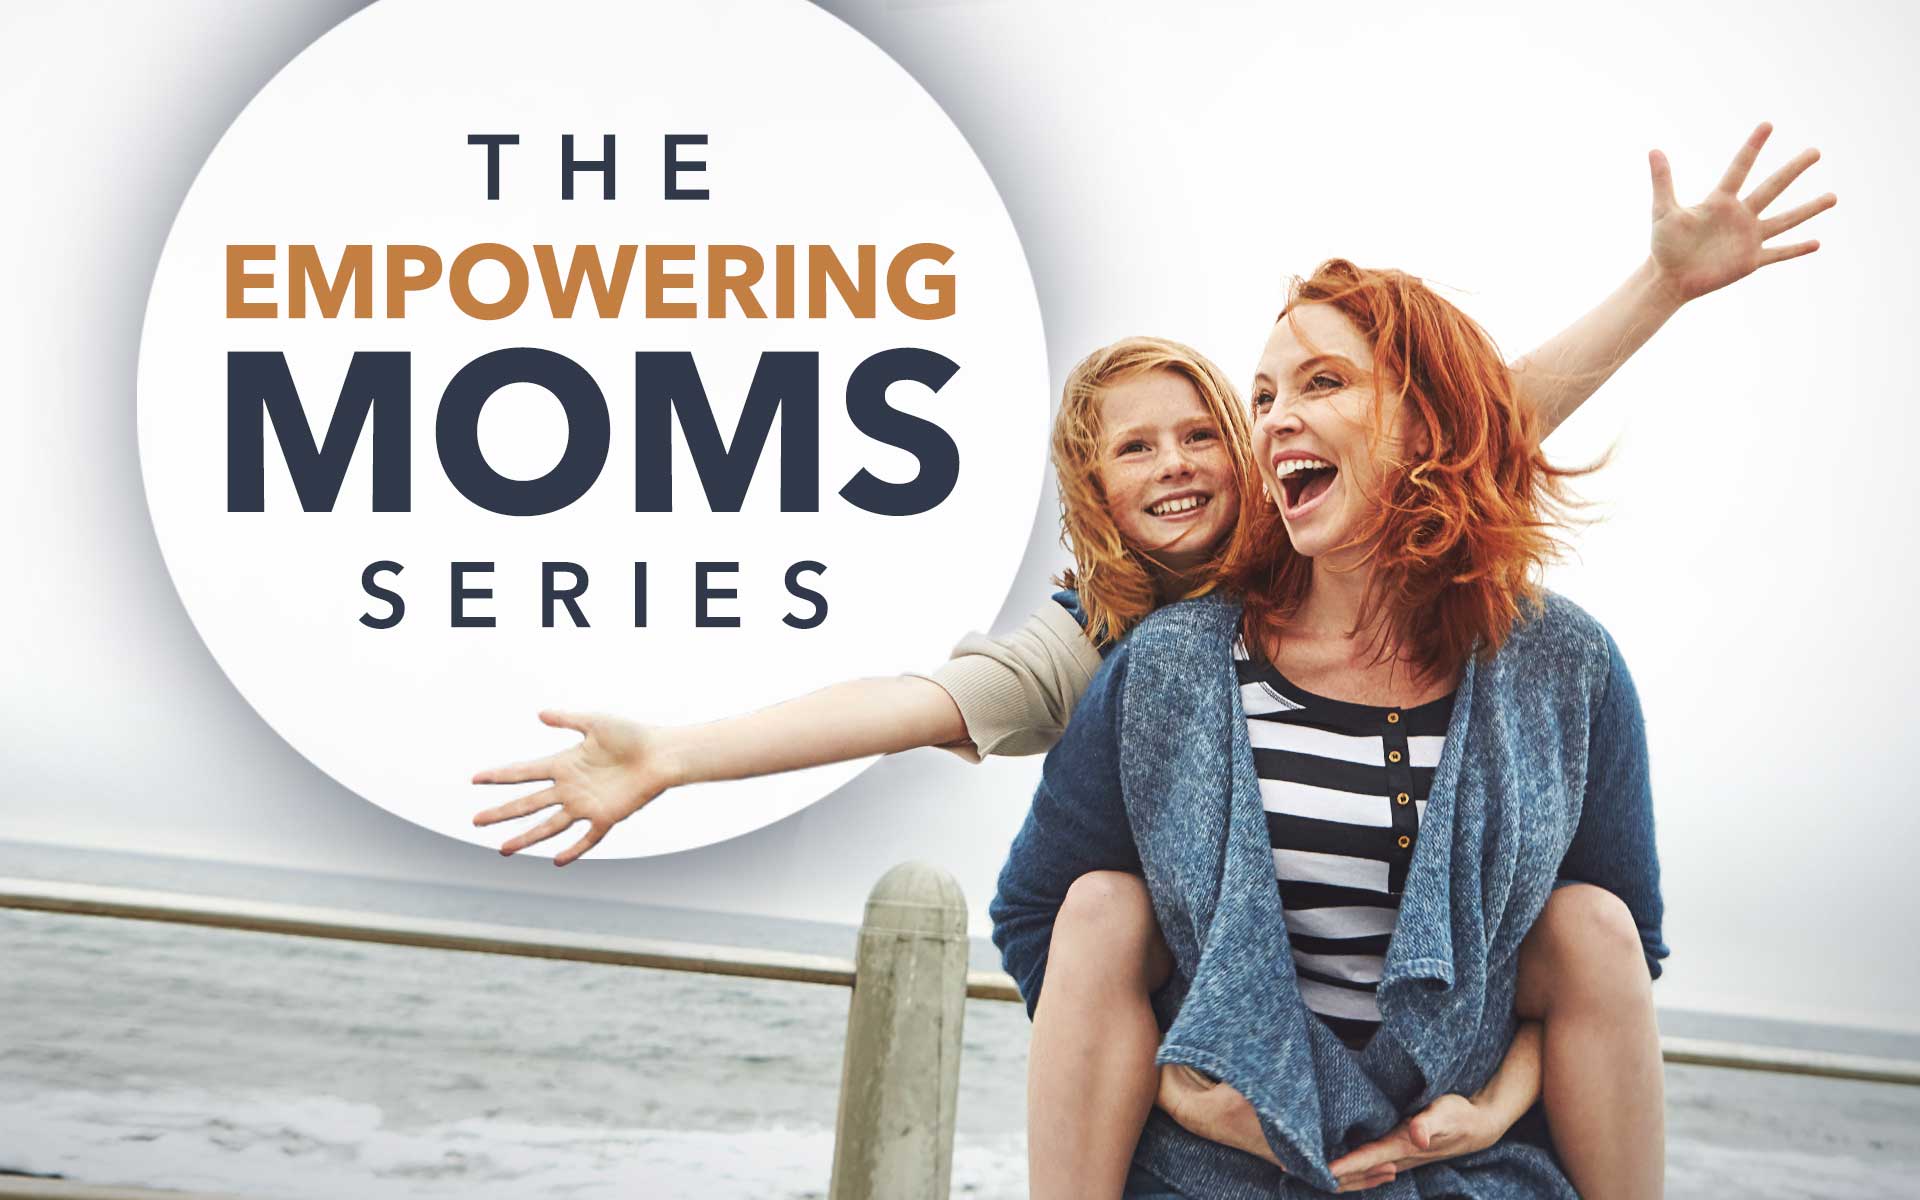 The Empowering Moms Series